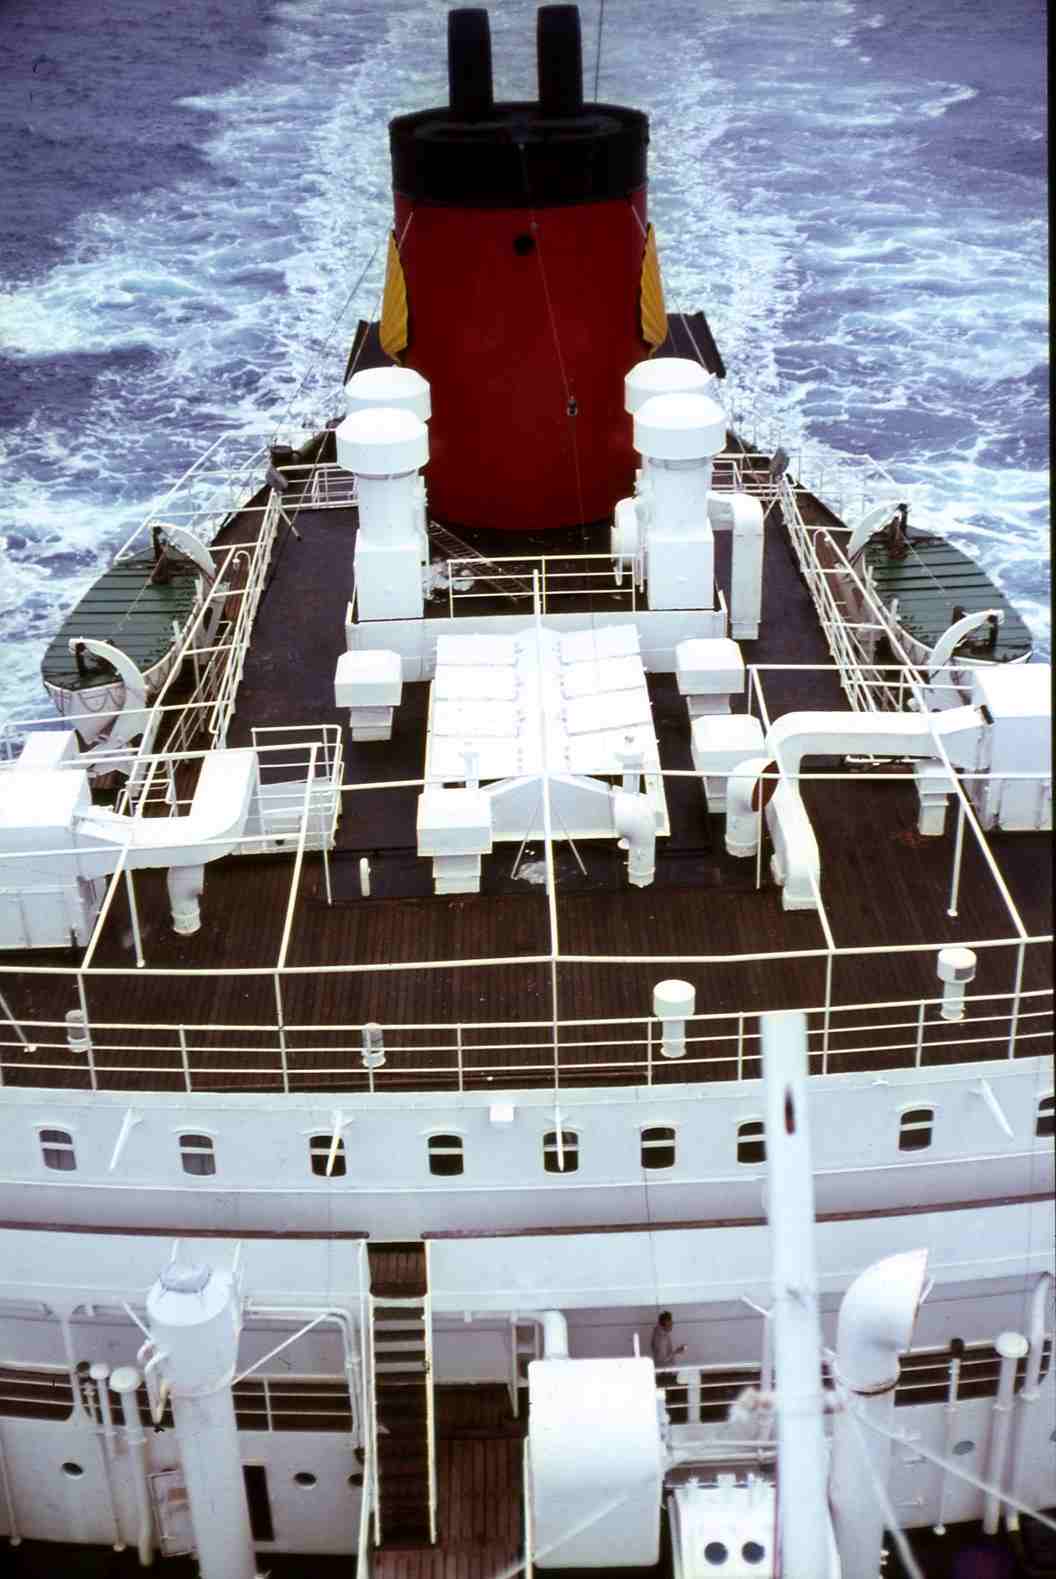 images my ideas 19/19 WTN 1967-5 Hemifusus At Sea Aft Accomodation From Mast Top.jpg